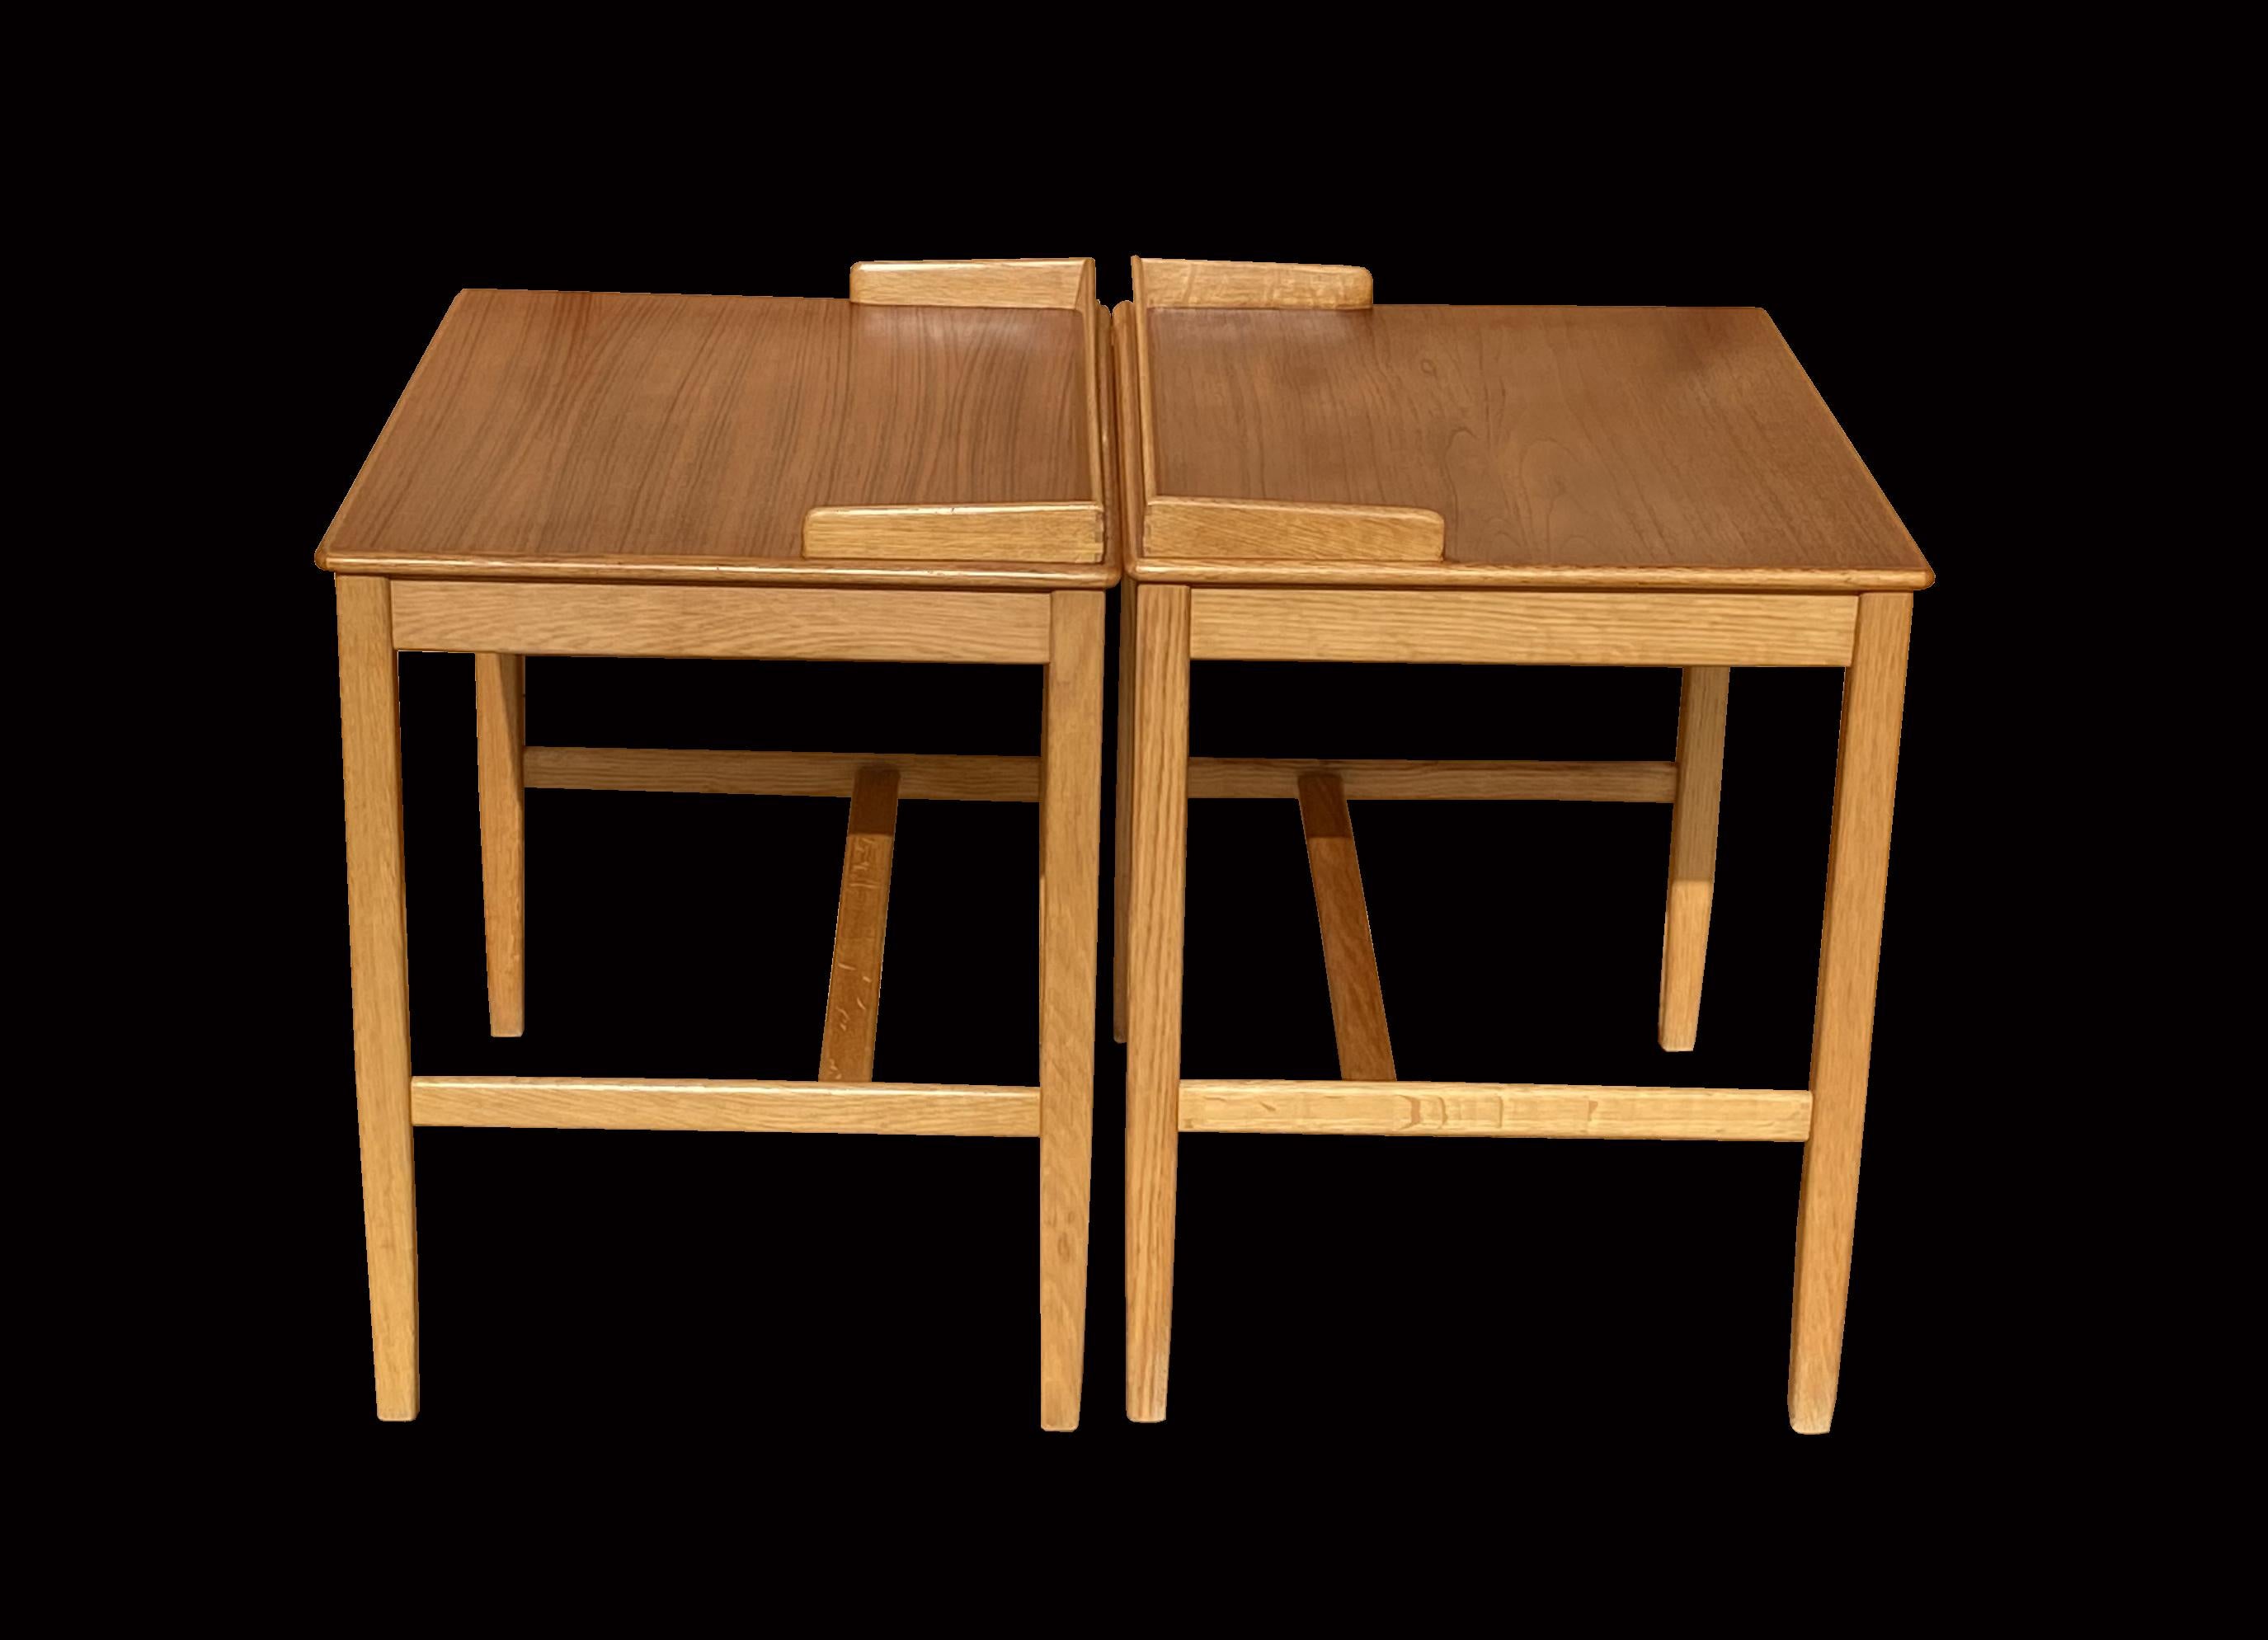 This pair of single drawer tables have teak tops and oak bases, made in Sweden by Tingstroms and retailed by Bra Bohag. They are very nice quality and could easily be used as bedsides, end tables as side or occasional tables.